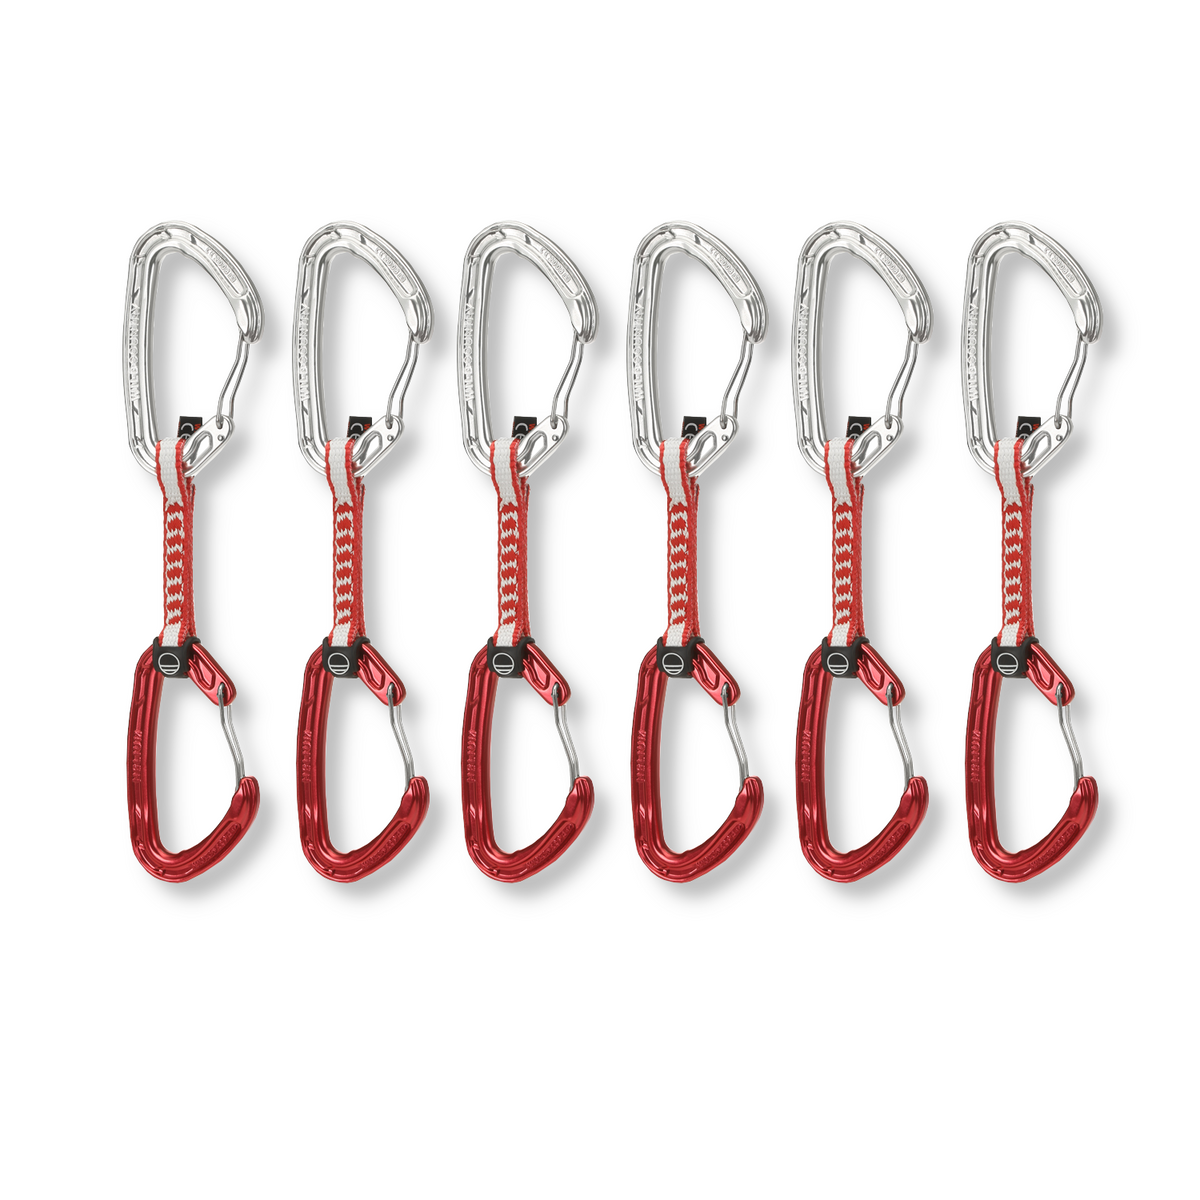 Wild Country Helium 3.0 Quickdraw 10cm 6-Pack